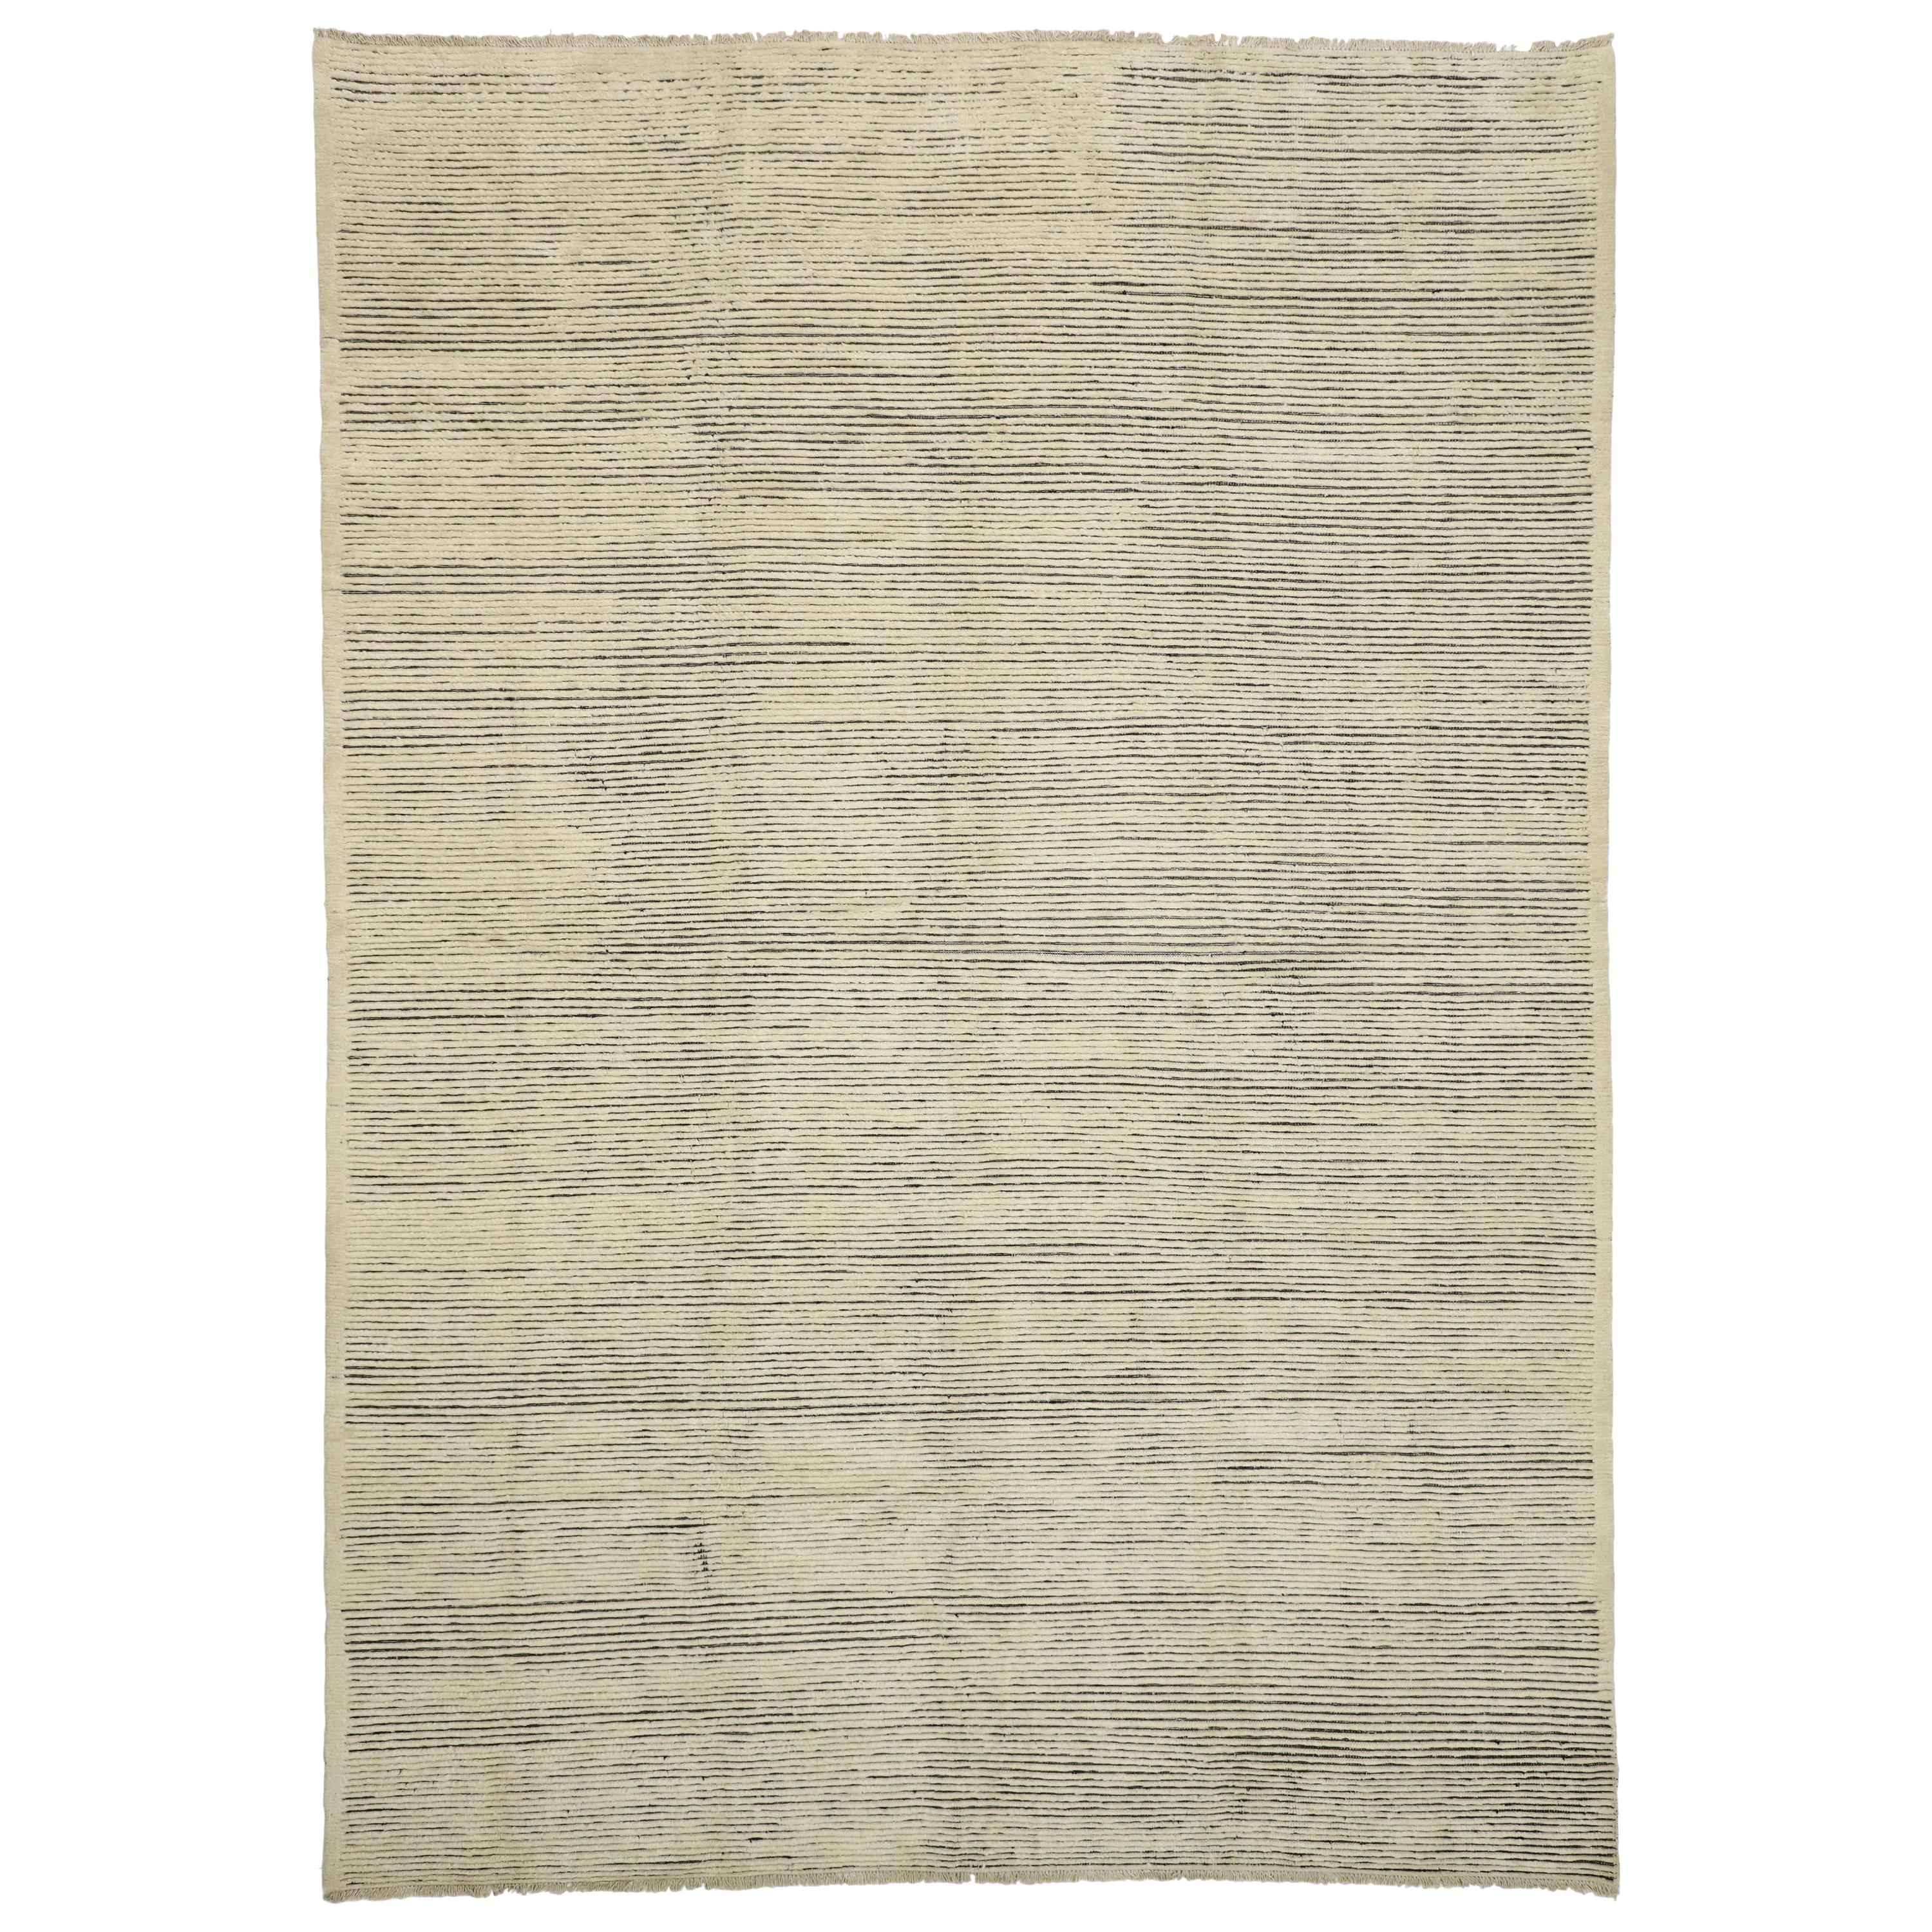 New Contemporary Moroccan Area Rug with Minimalist Organic Modern Style